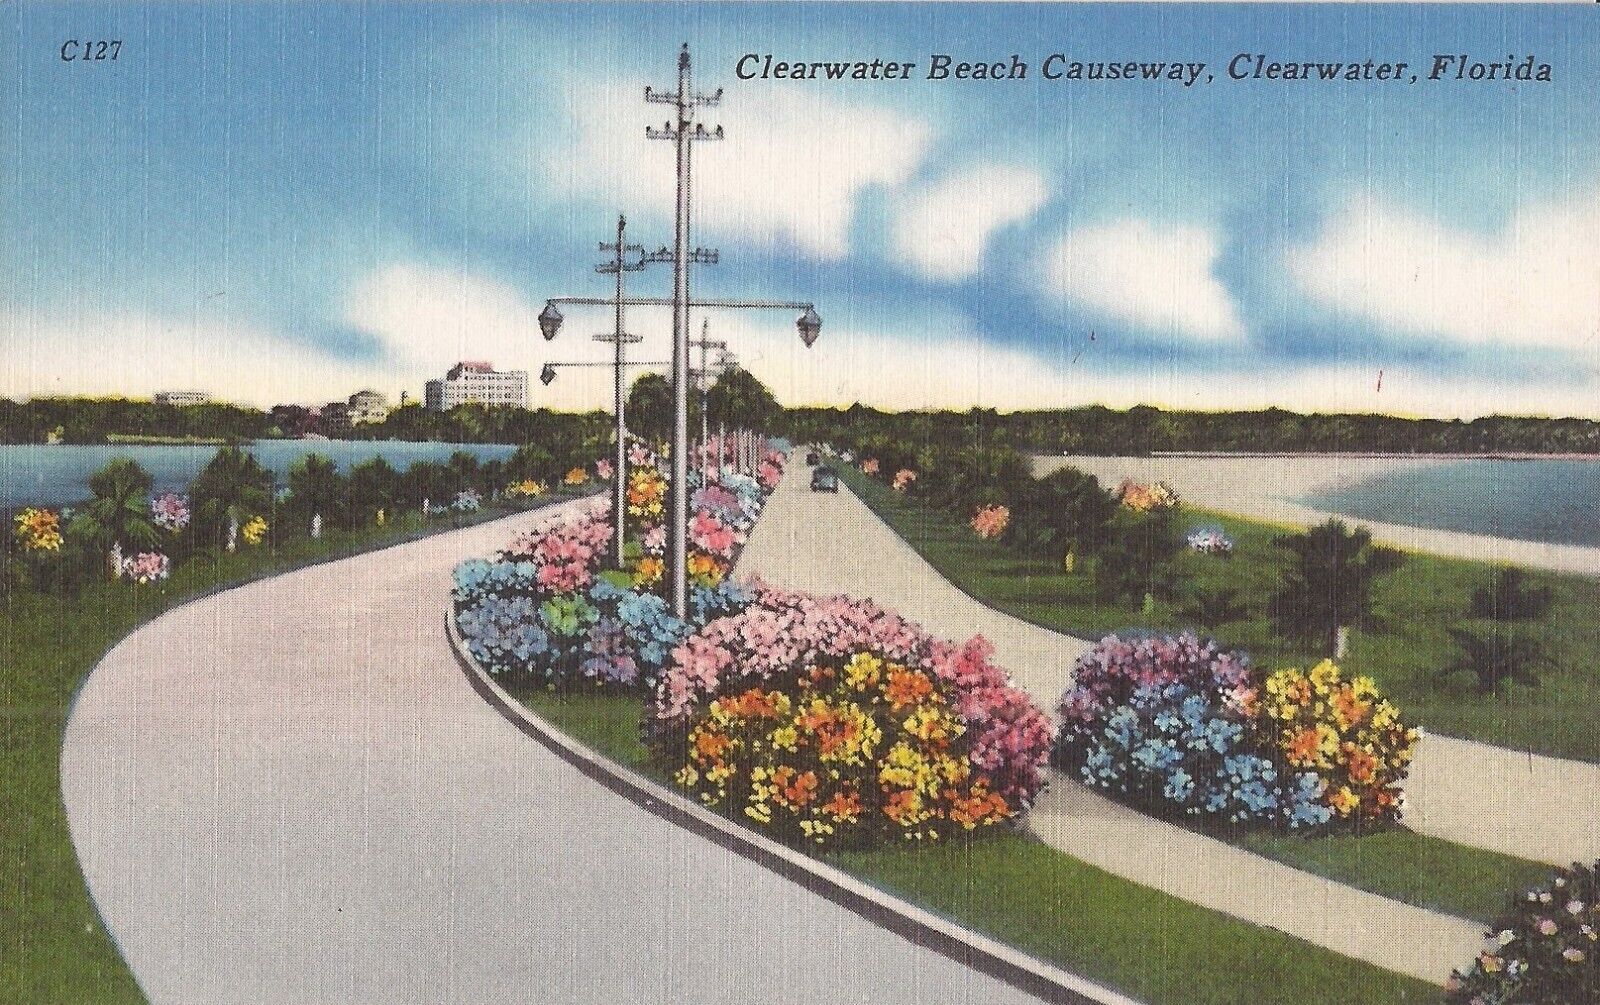 Clearwater, FLORIDA - Clearwater Beach Causeway - Cars & Flowers